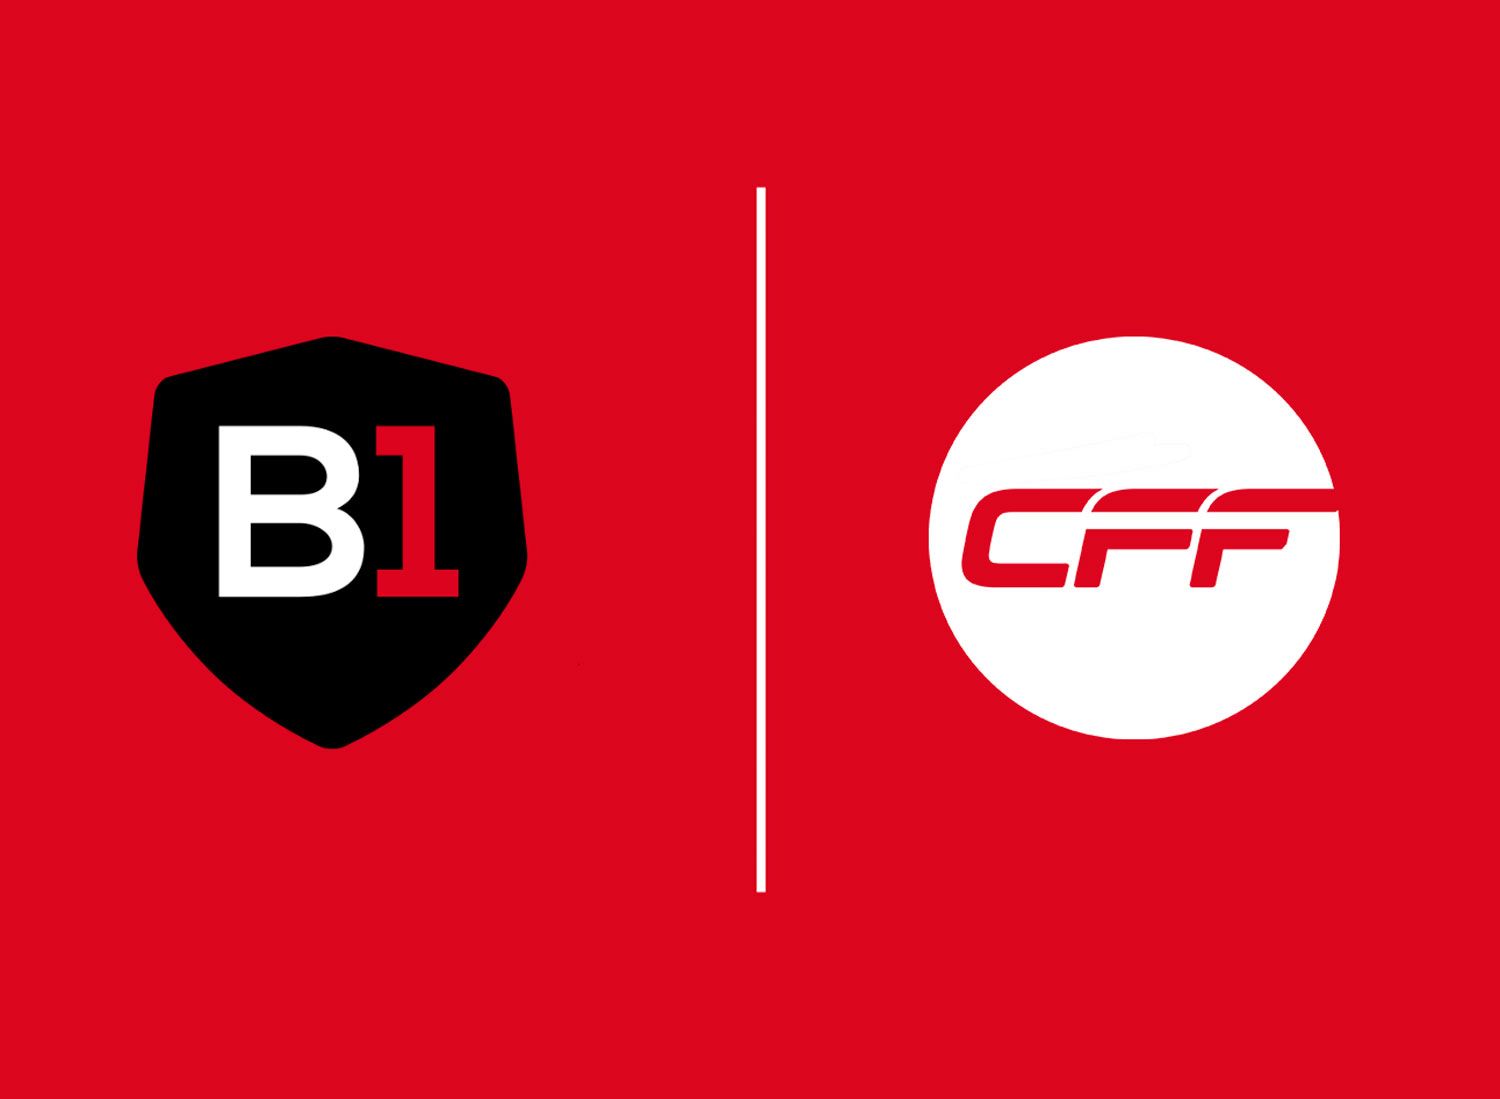 B1 USA signs a new partnership with CFF